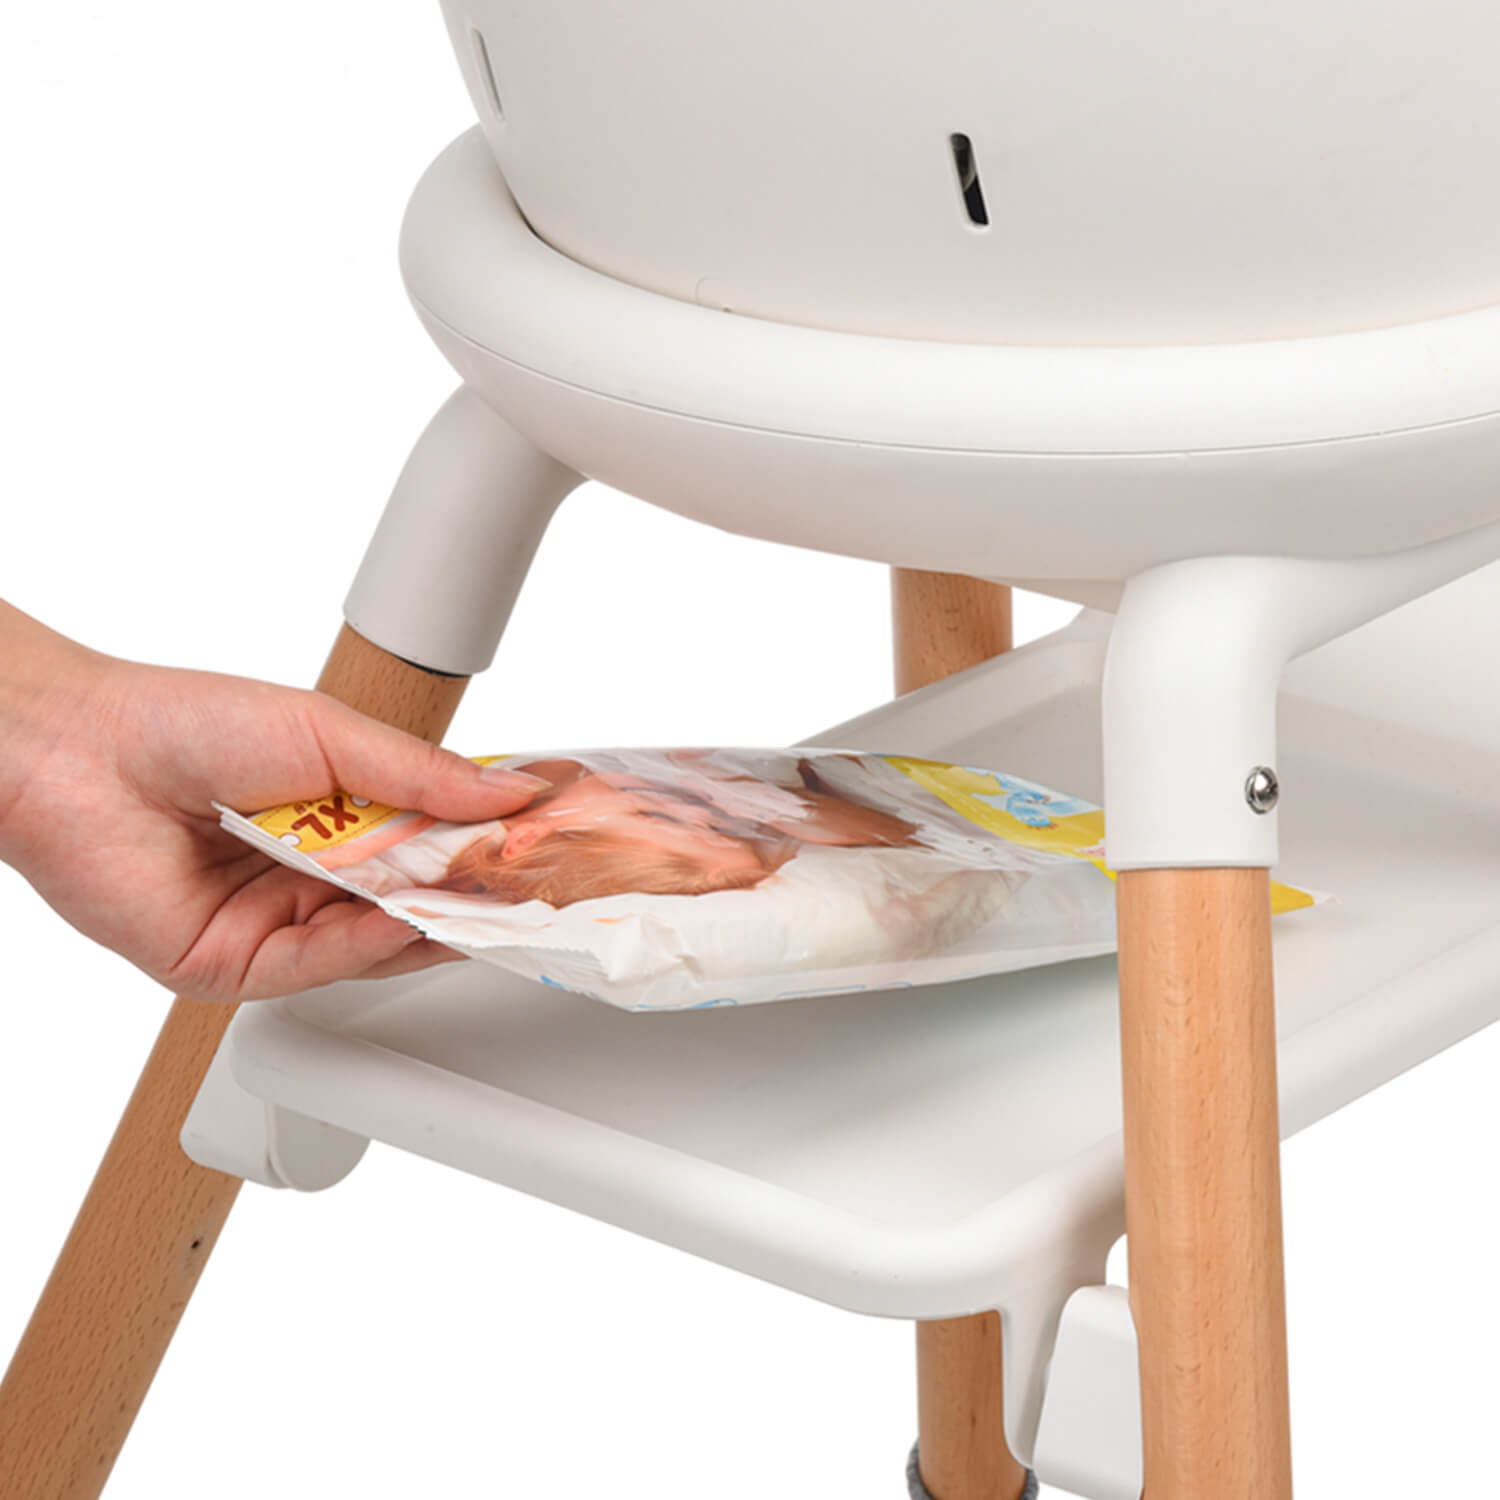 4-in-1 Baby High Chair